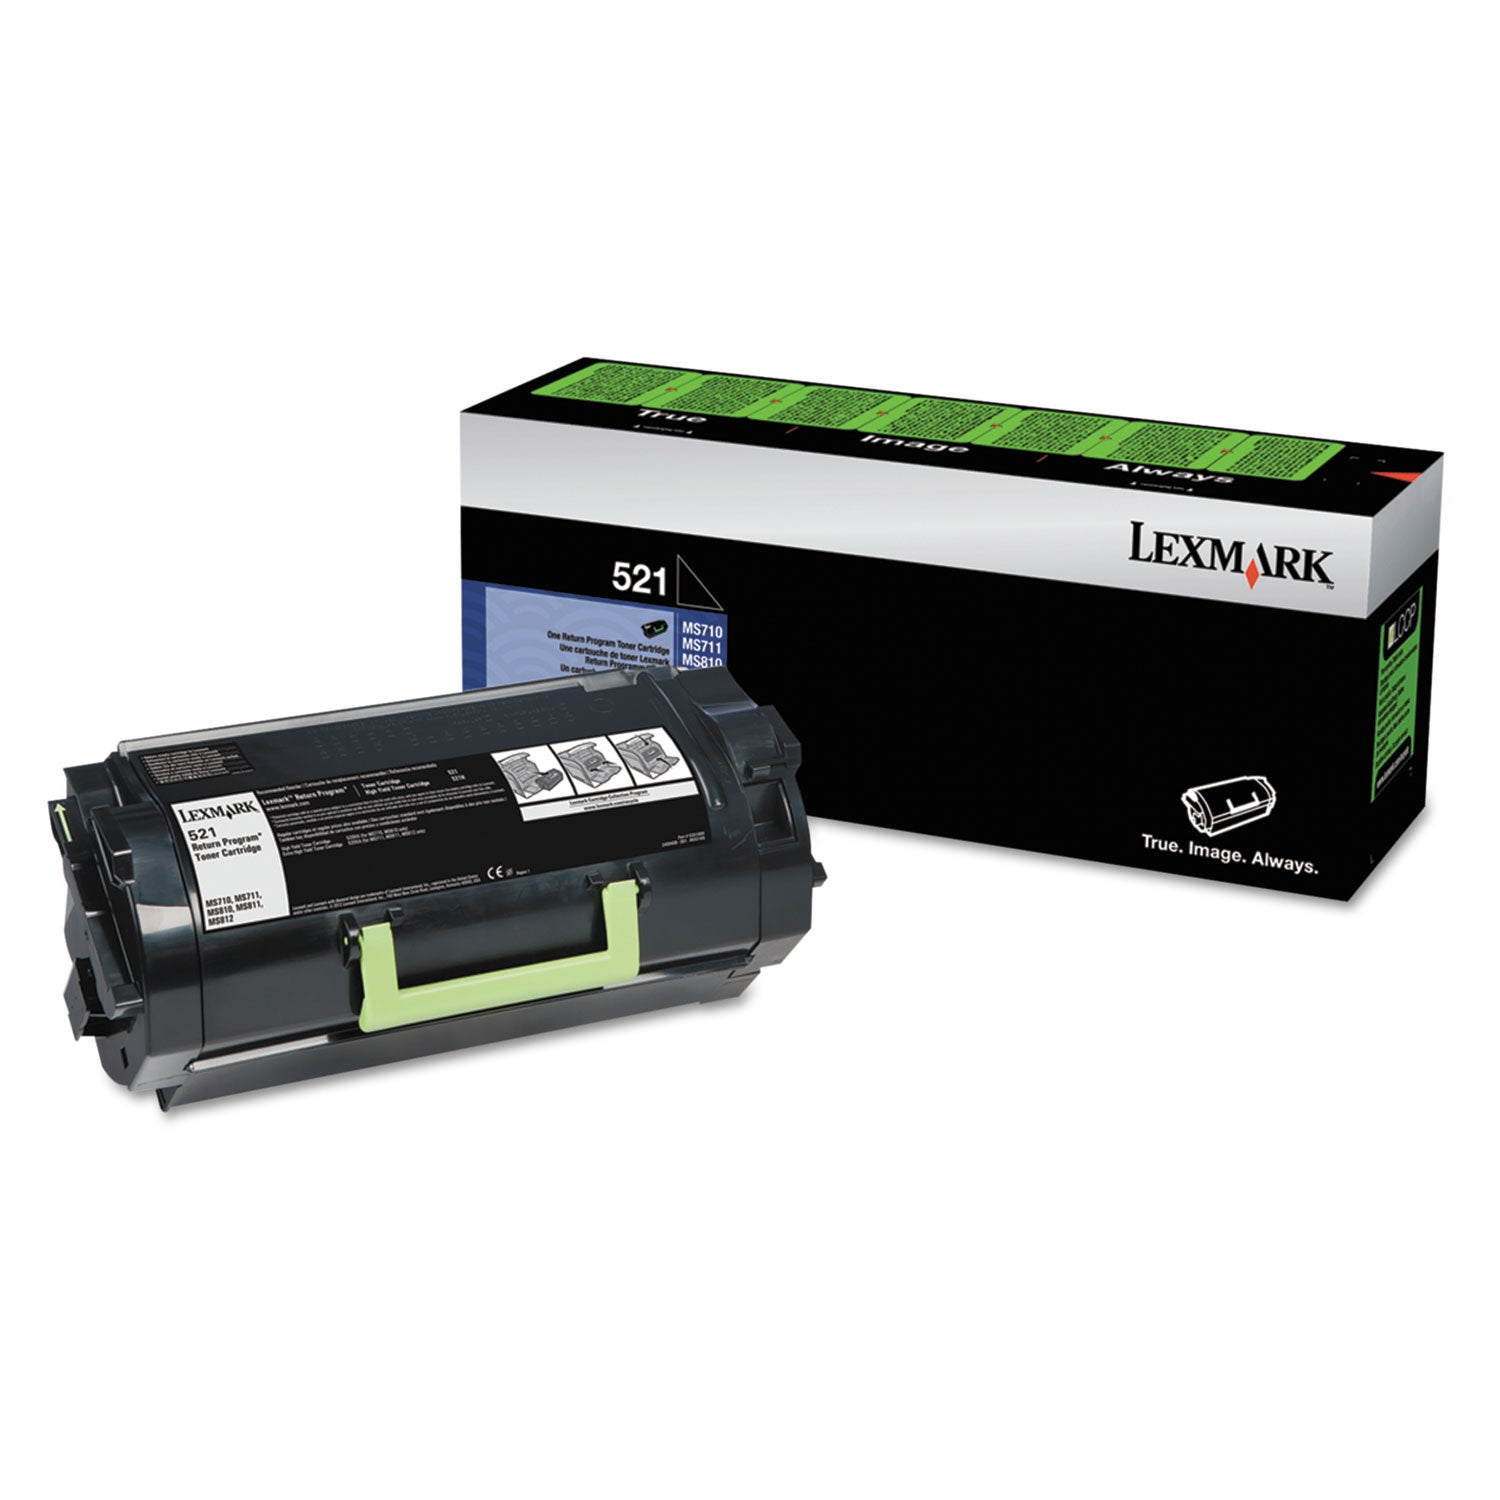 52D1000 Toner, 6,000 Page-Yield, Black - 